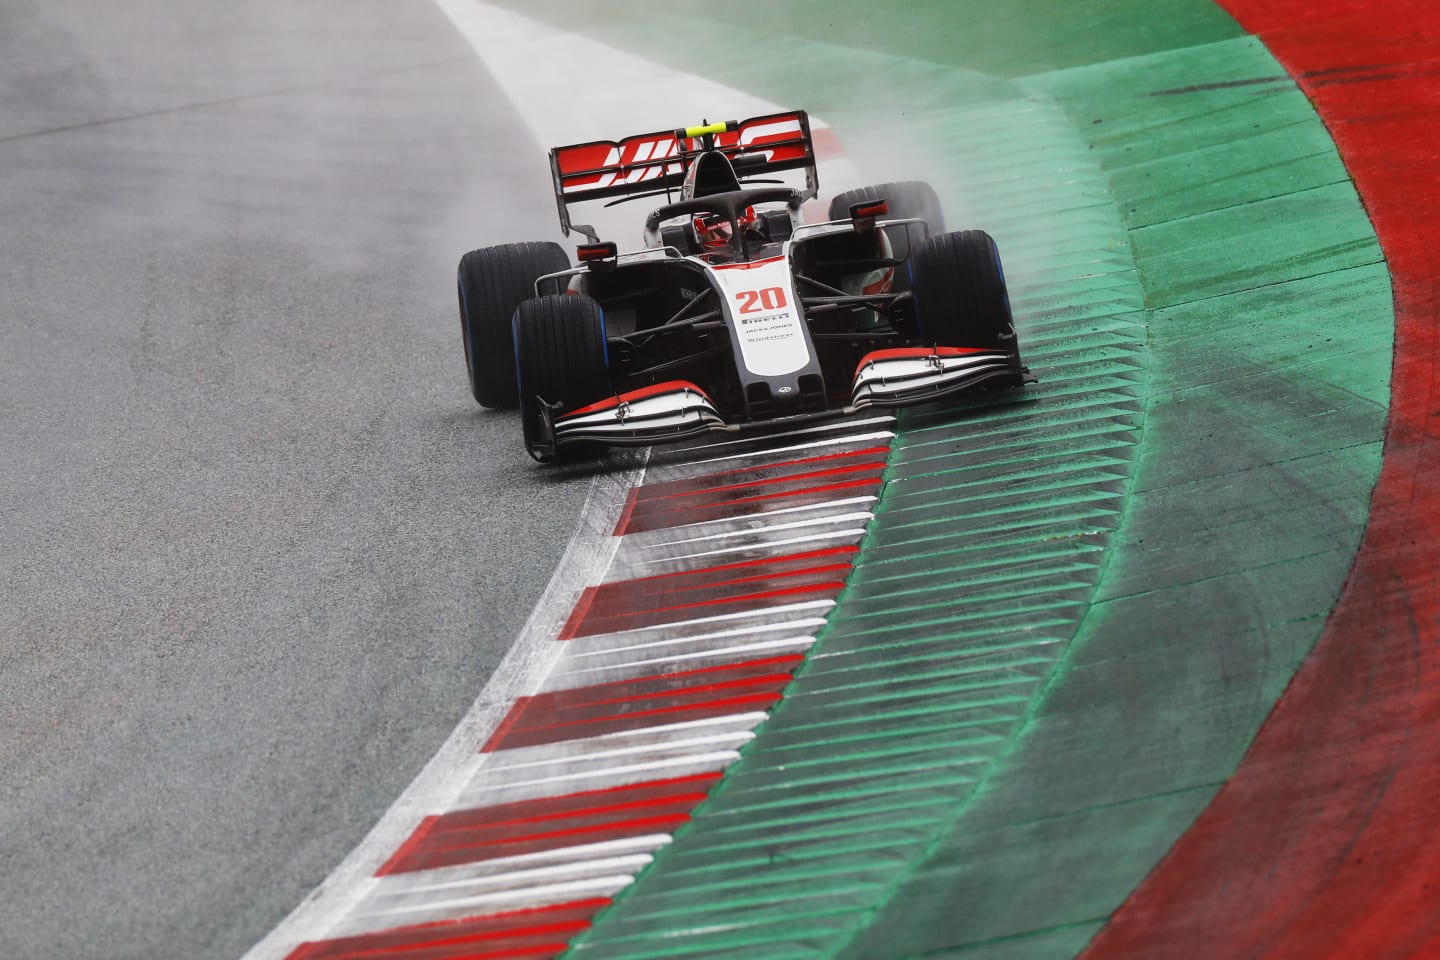 SPIELBERG, AUSTRIA - JULY 11: Kevin Magnussen of Denmark driving the (20) Haas F1 Team VF-20 Ferrari on track during qualifying for the Formula One Grand Prix of Styria at Red Bull Ring on July 11, 2020 in Spielberg, Austria. (Photo by Leonhard Foeger/Pool via Getty Images)